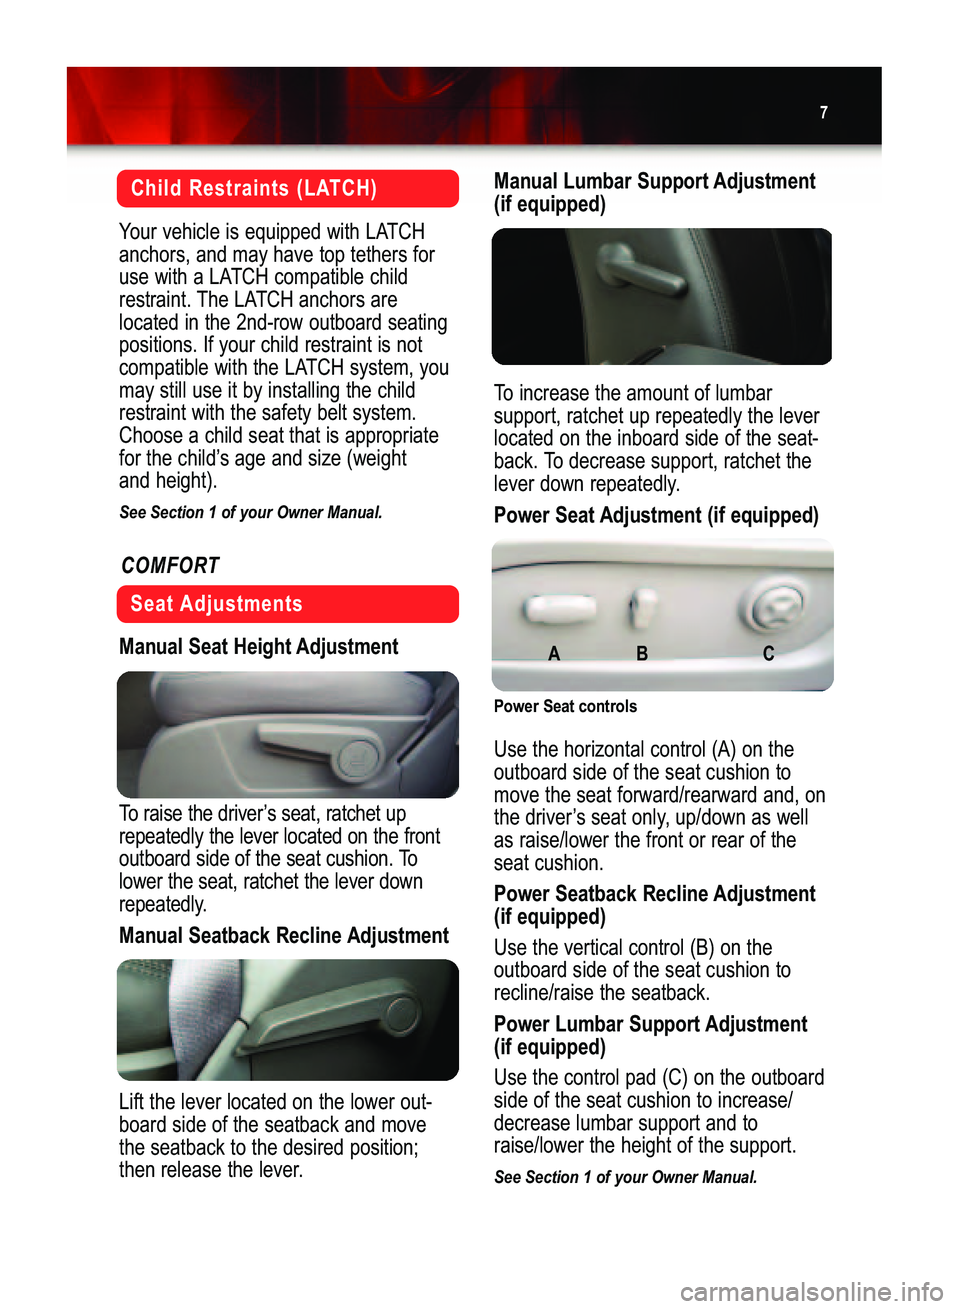 GMC ACADIA 2007  Get To Know Guide 
7
Manual Lumbar Support Adjustment
(if equipped)

To increase the amount of lumbar
support, ratchet up repeatedly the lever
located on the inboard side of the seat�
back. To decrease support, ratchet